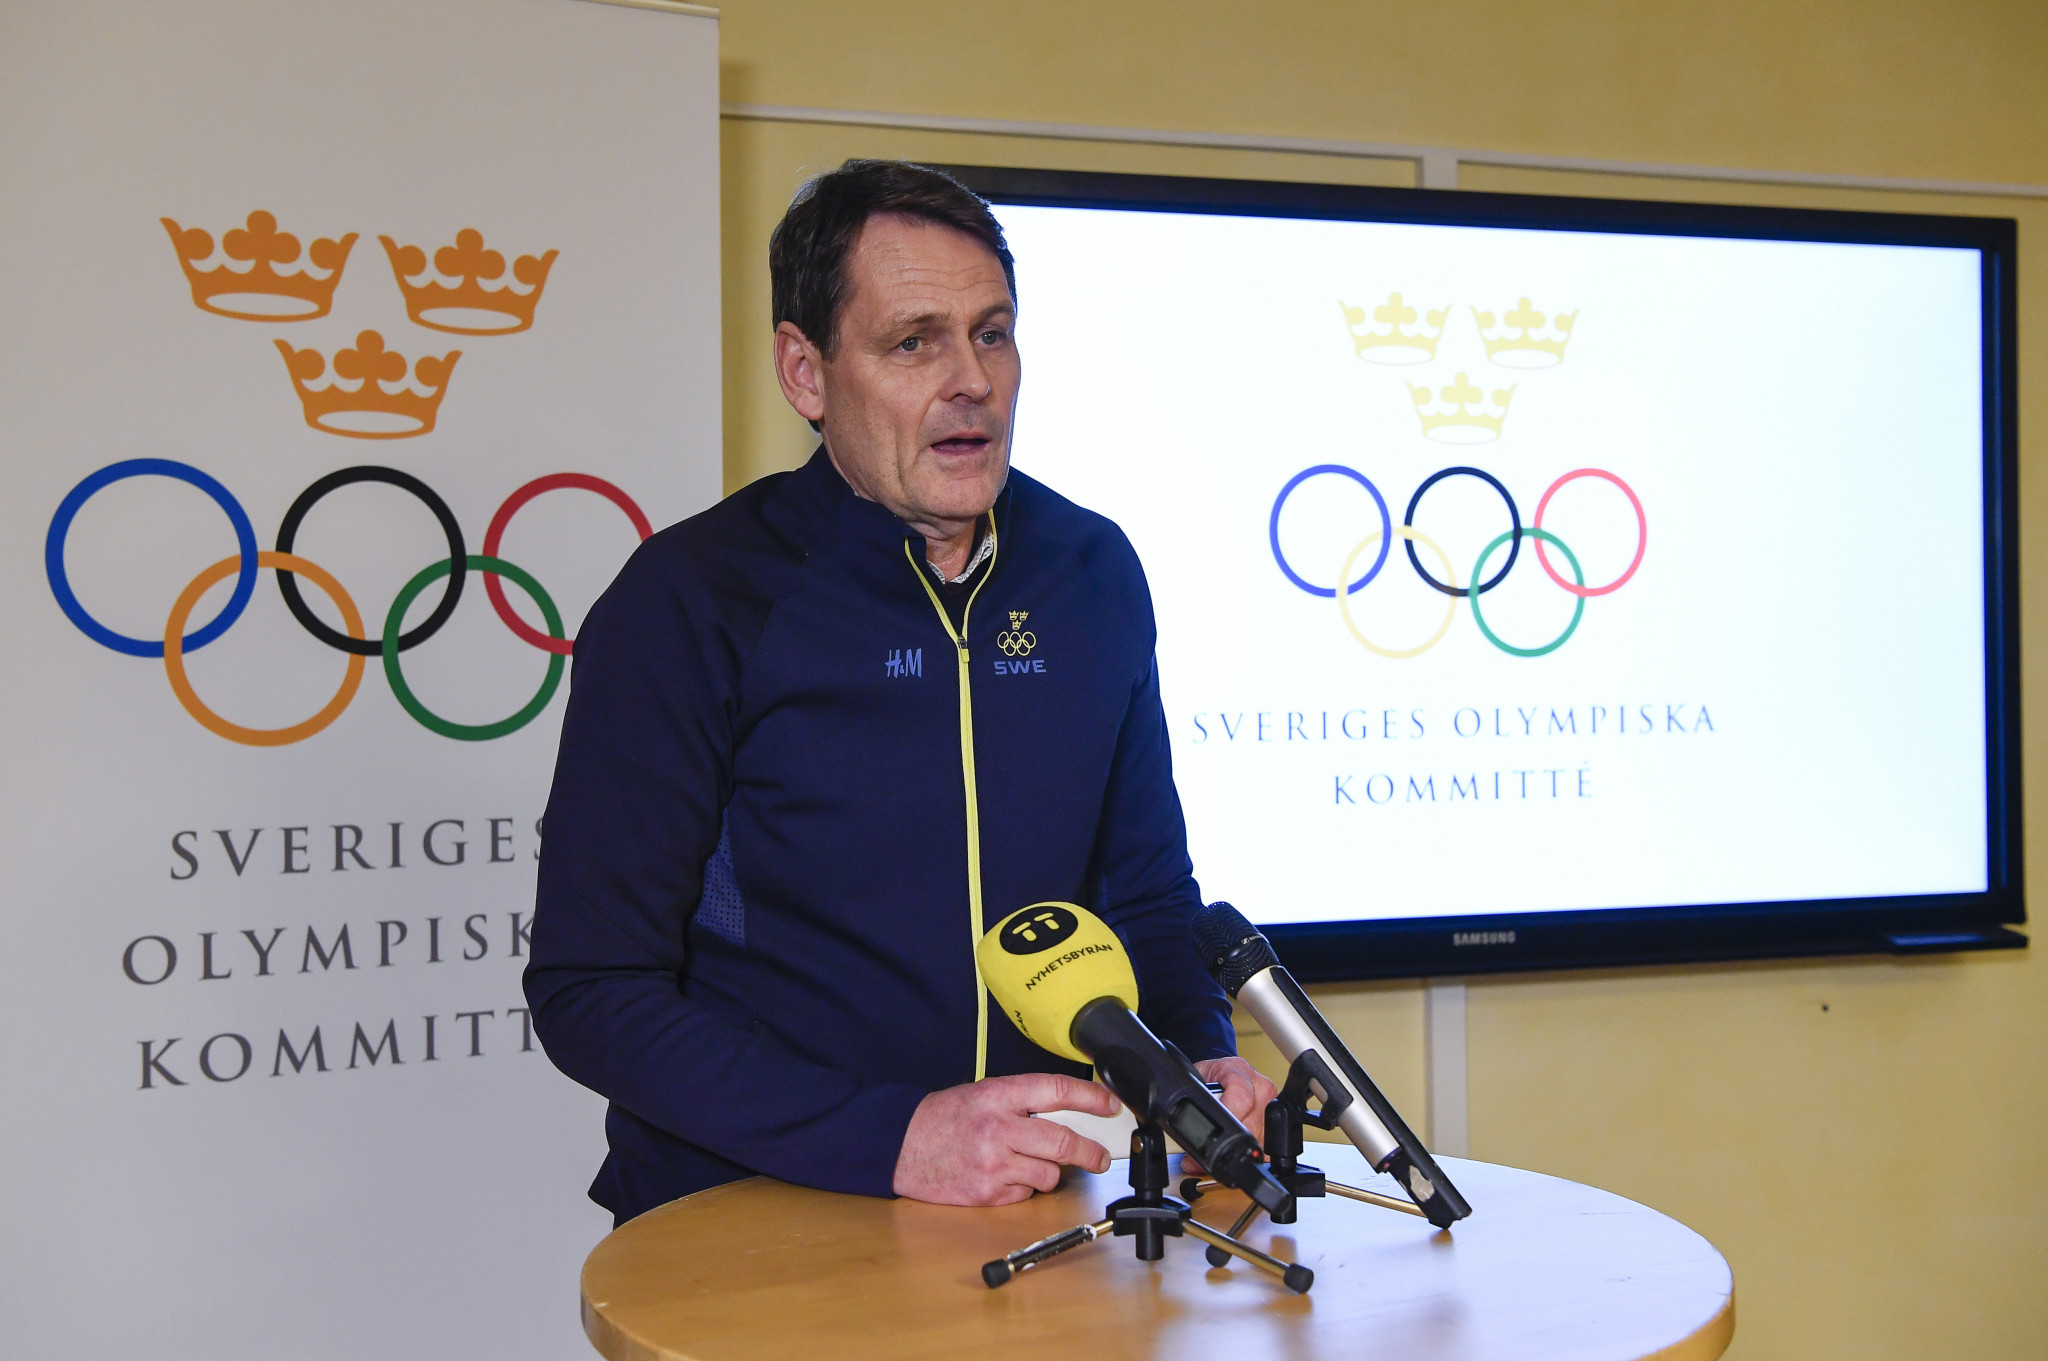 Swedish Olympic Committee chief executive, Peter Reinebo pictured speaking about the potential Stockholm 2026 bid, has risked an IOC warning after speaking about rival contenders ©Getty Images